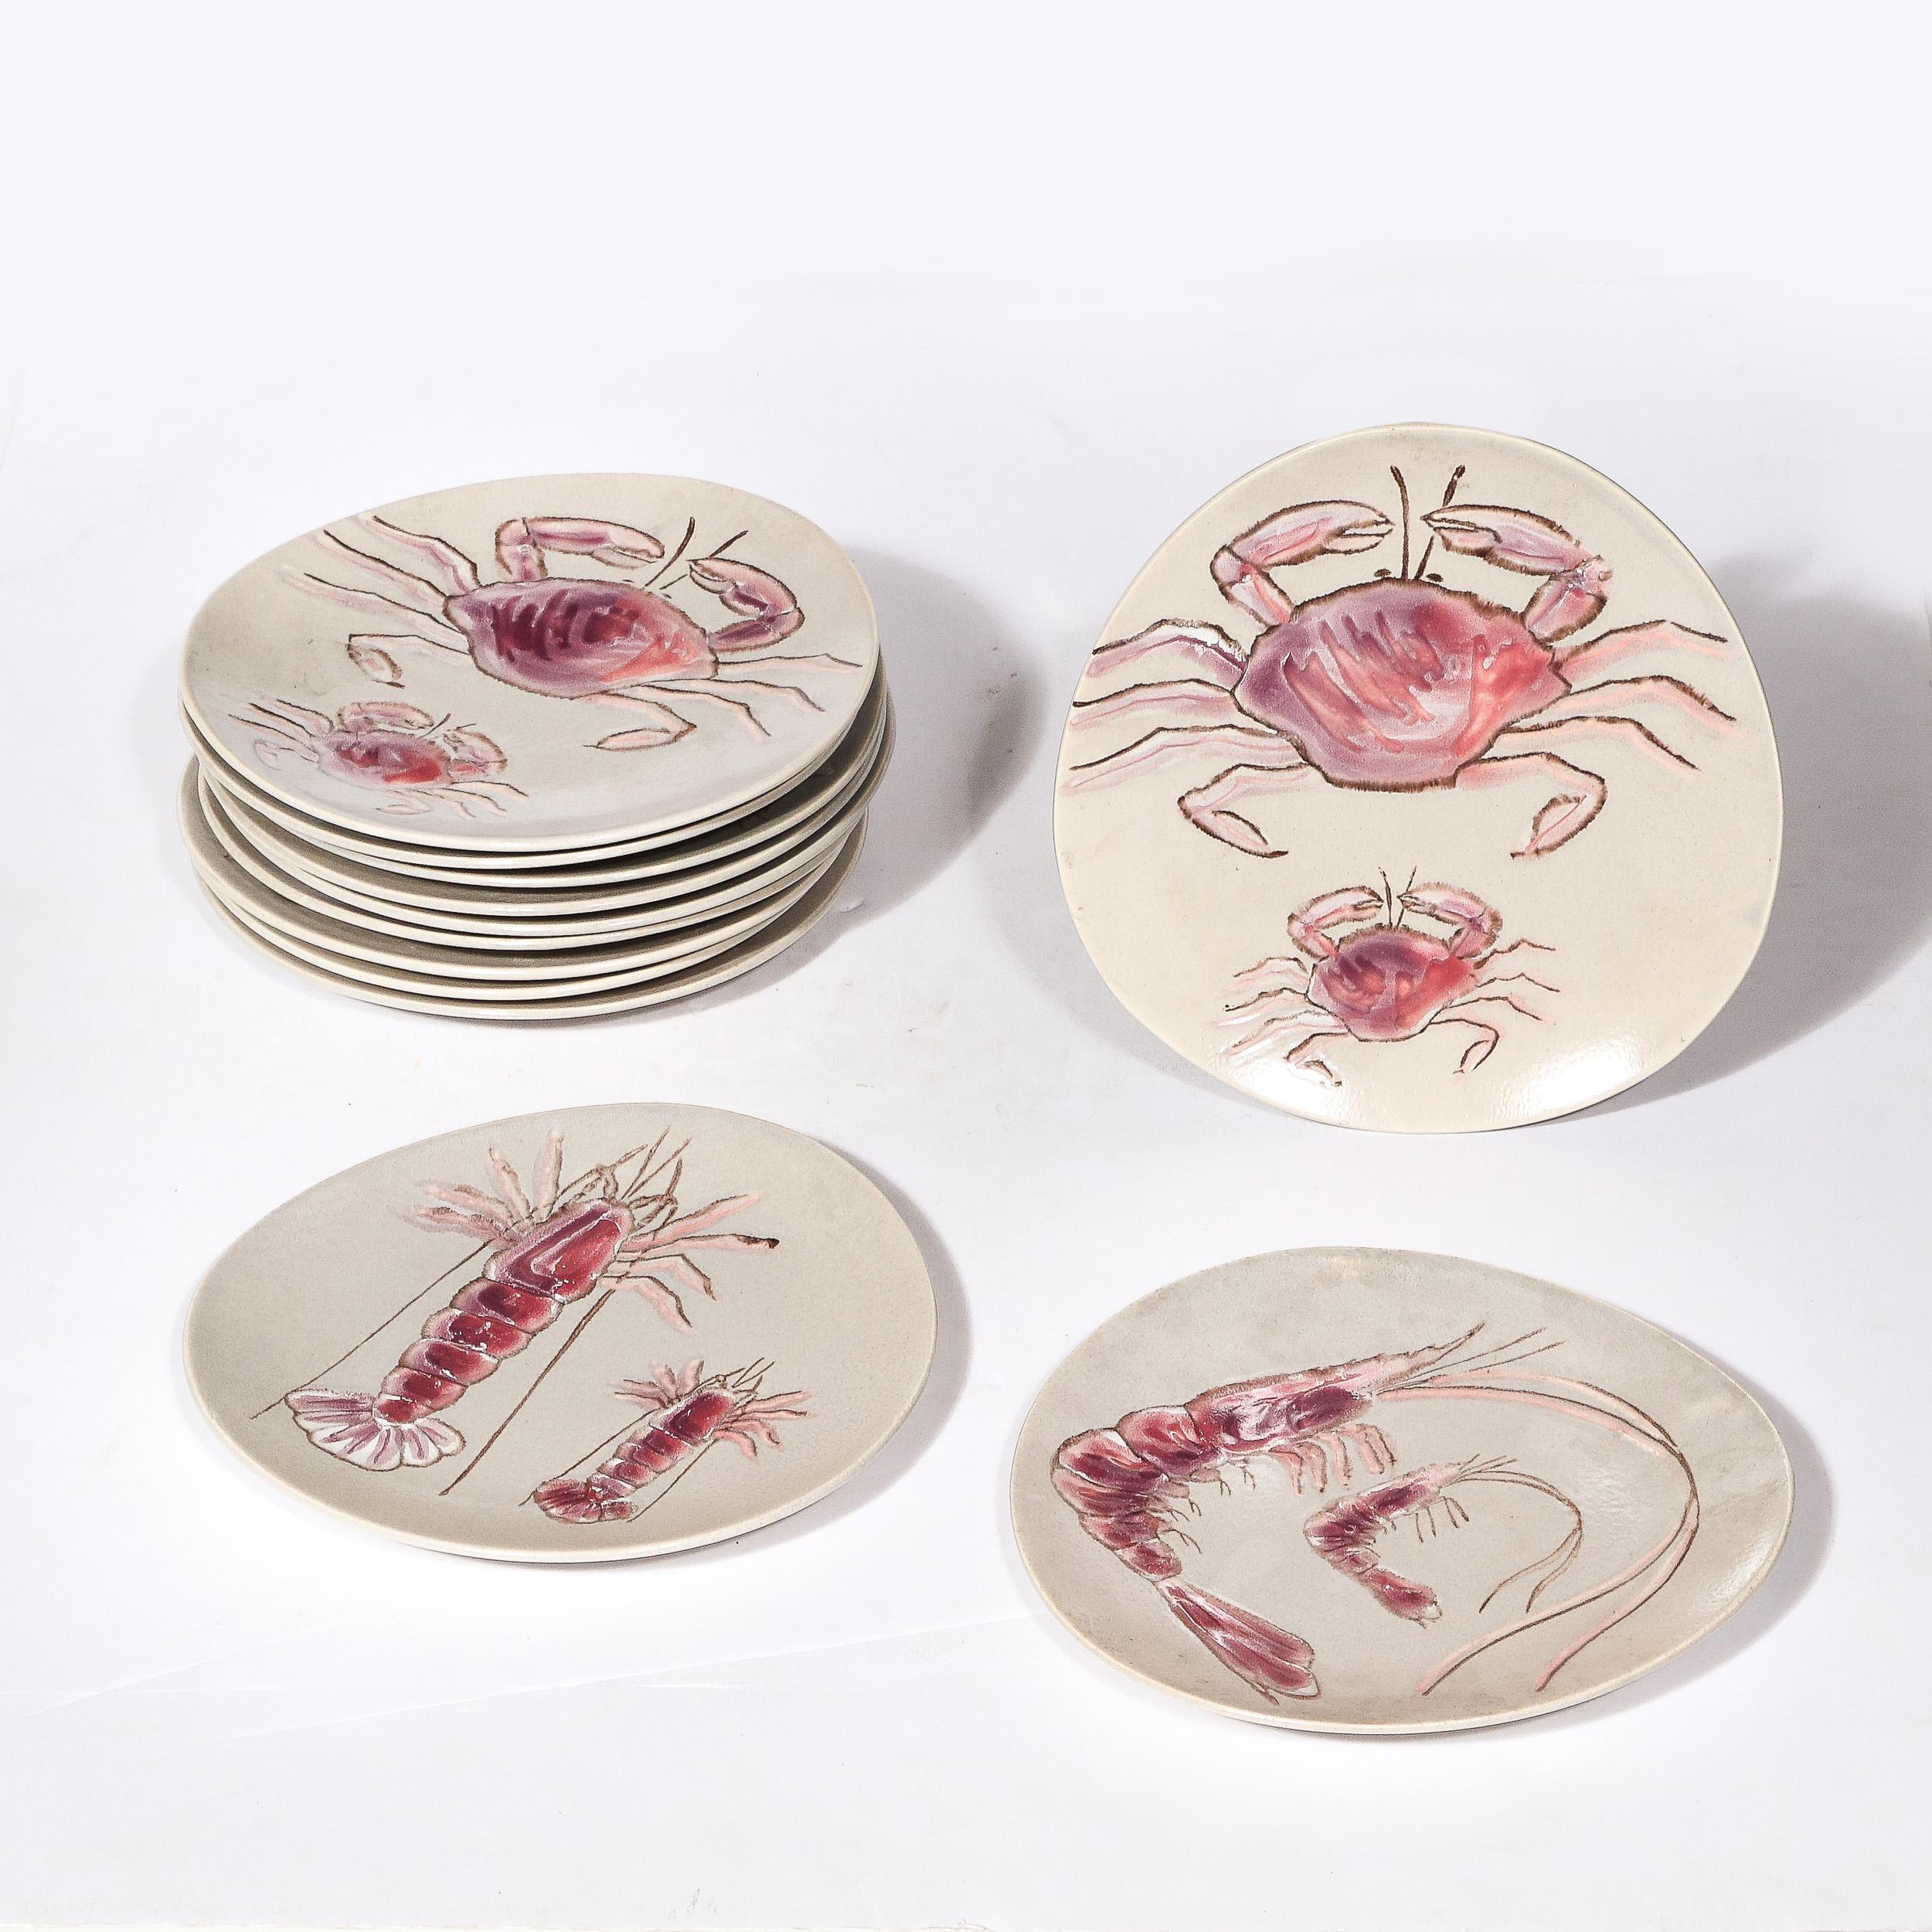 Set of 12 Mid-Century Ceramic Plates w/ Oceanic Motifs in Mauve by MBFA Pornic In Excellent Condition For Sale In New York, NY